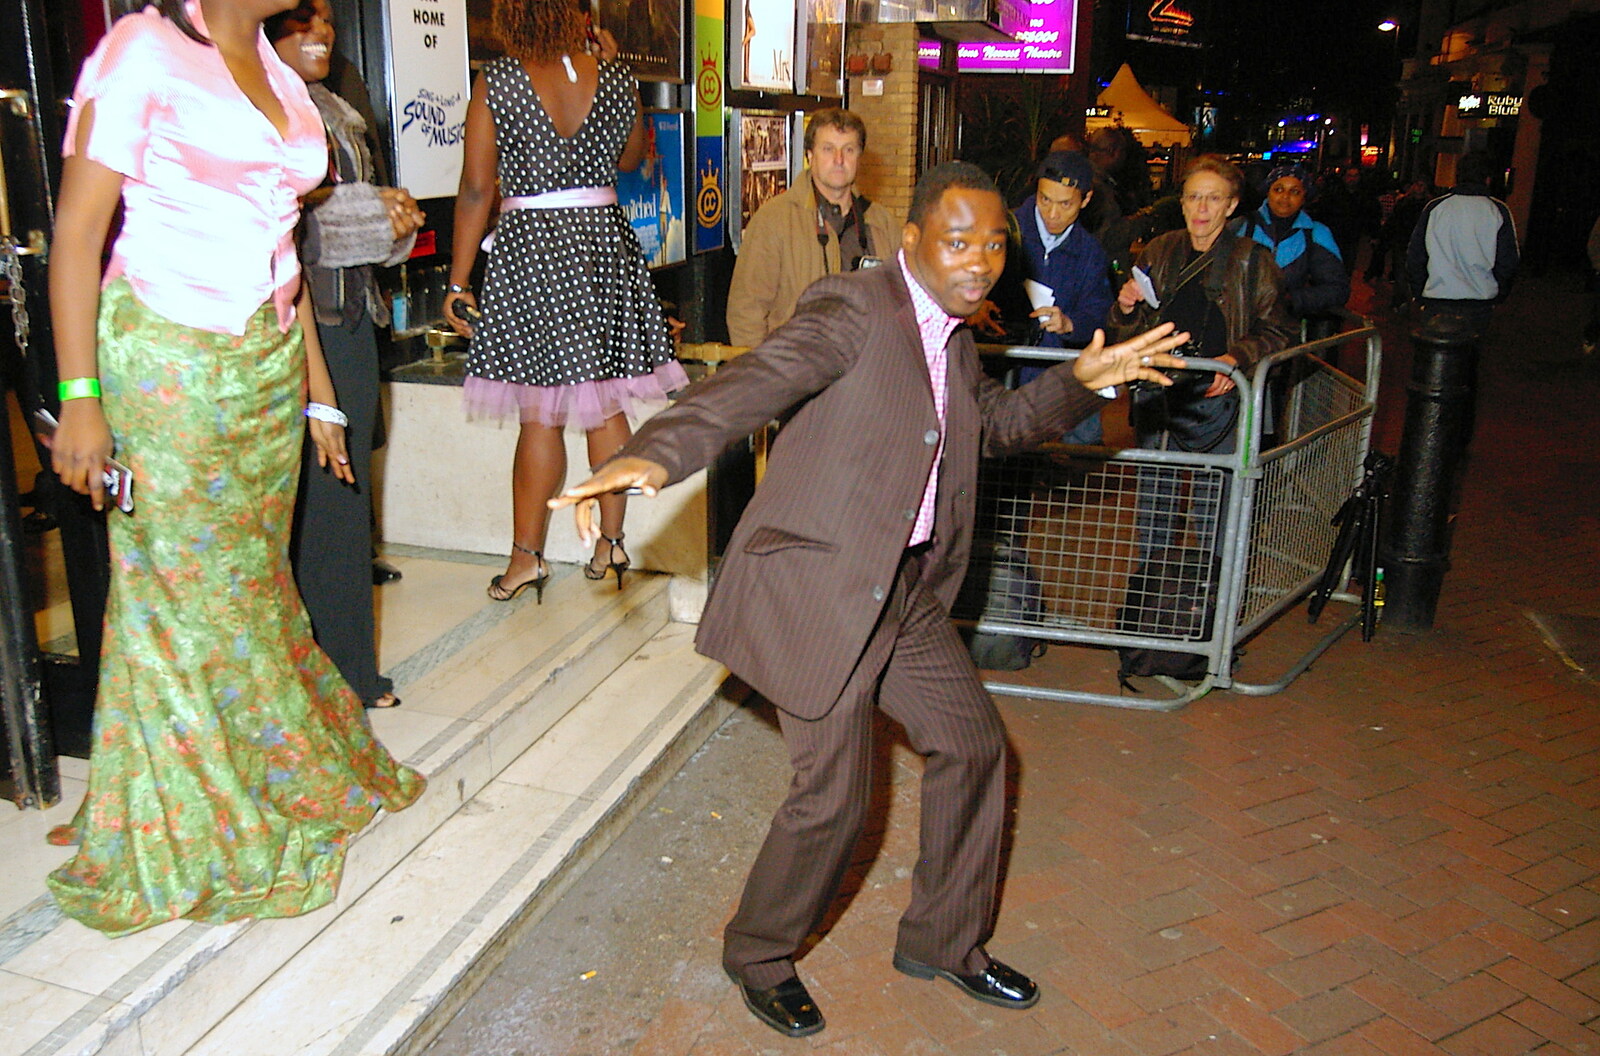 Dance moves from Celebrity Snappers: Becoming a Papparazzo, Leicester Square, London - 9th November 2005